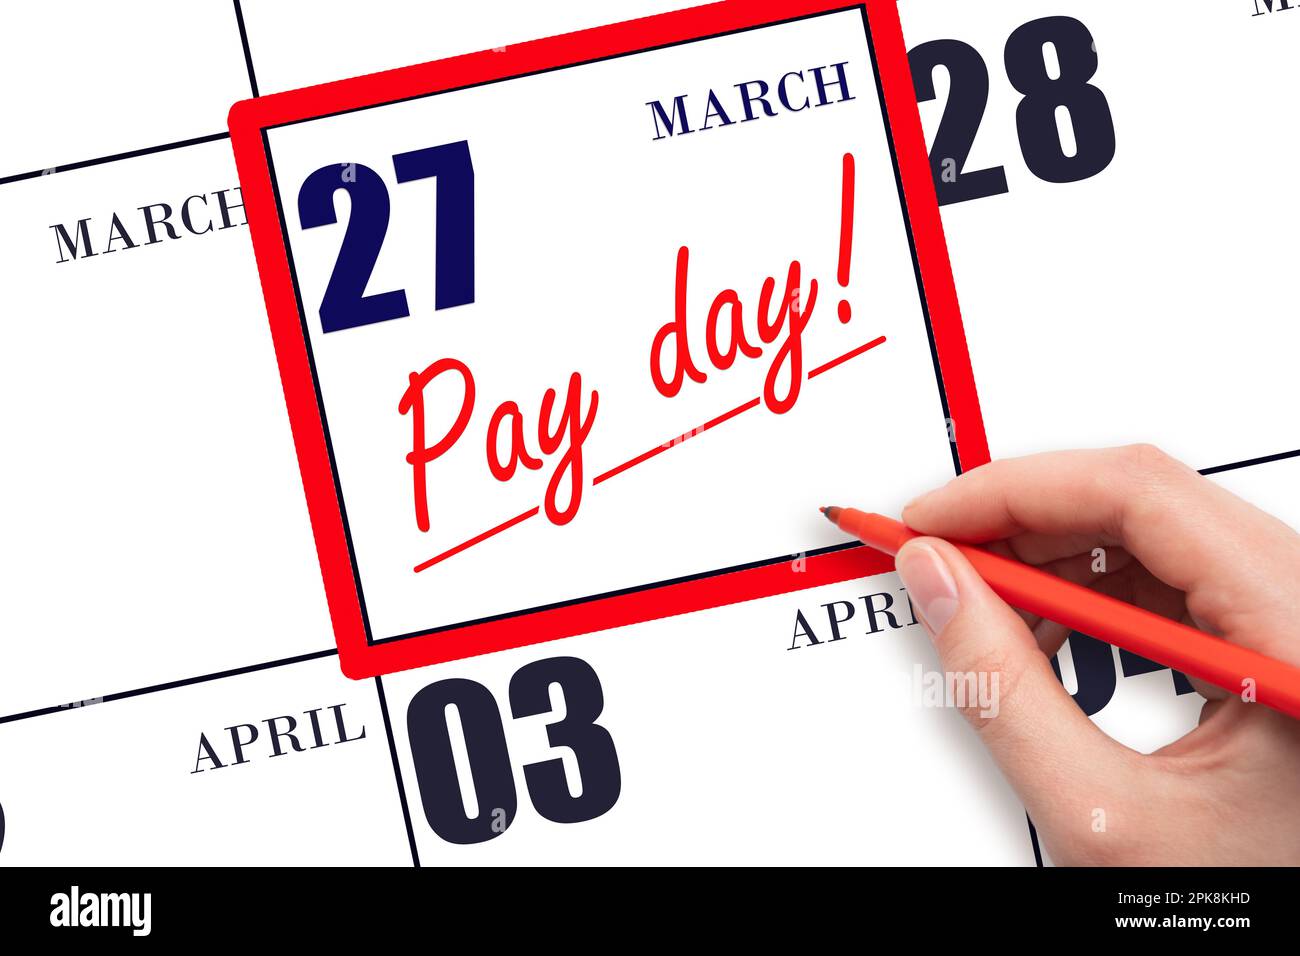 27th day of March. Hand writing text PAY DATE on calendar date March 27 and underline it. Payment due date. Reminder concept of payment. Spring month, Stock Photo